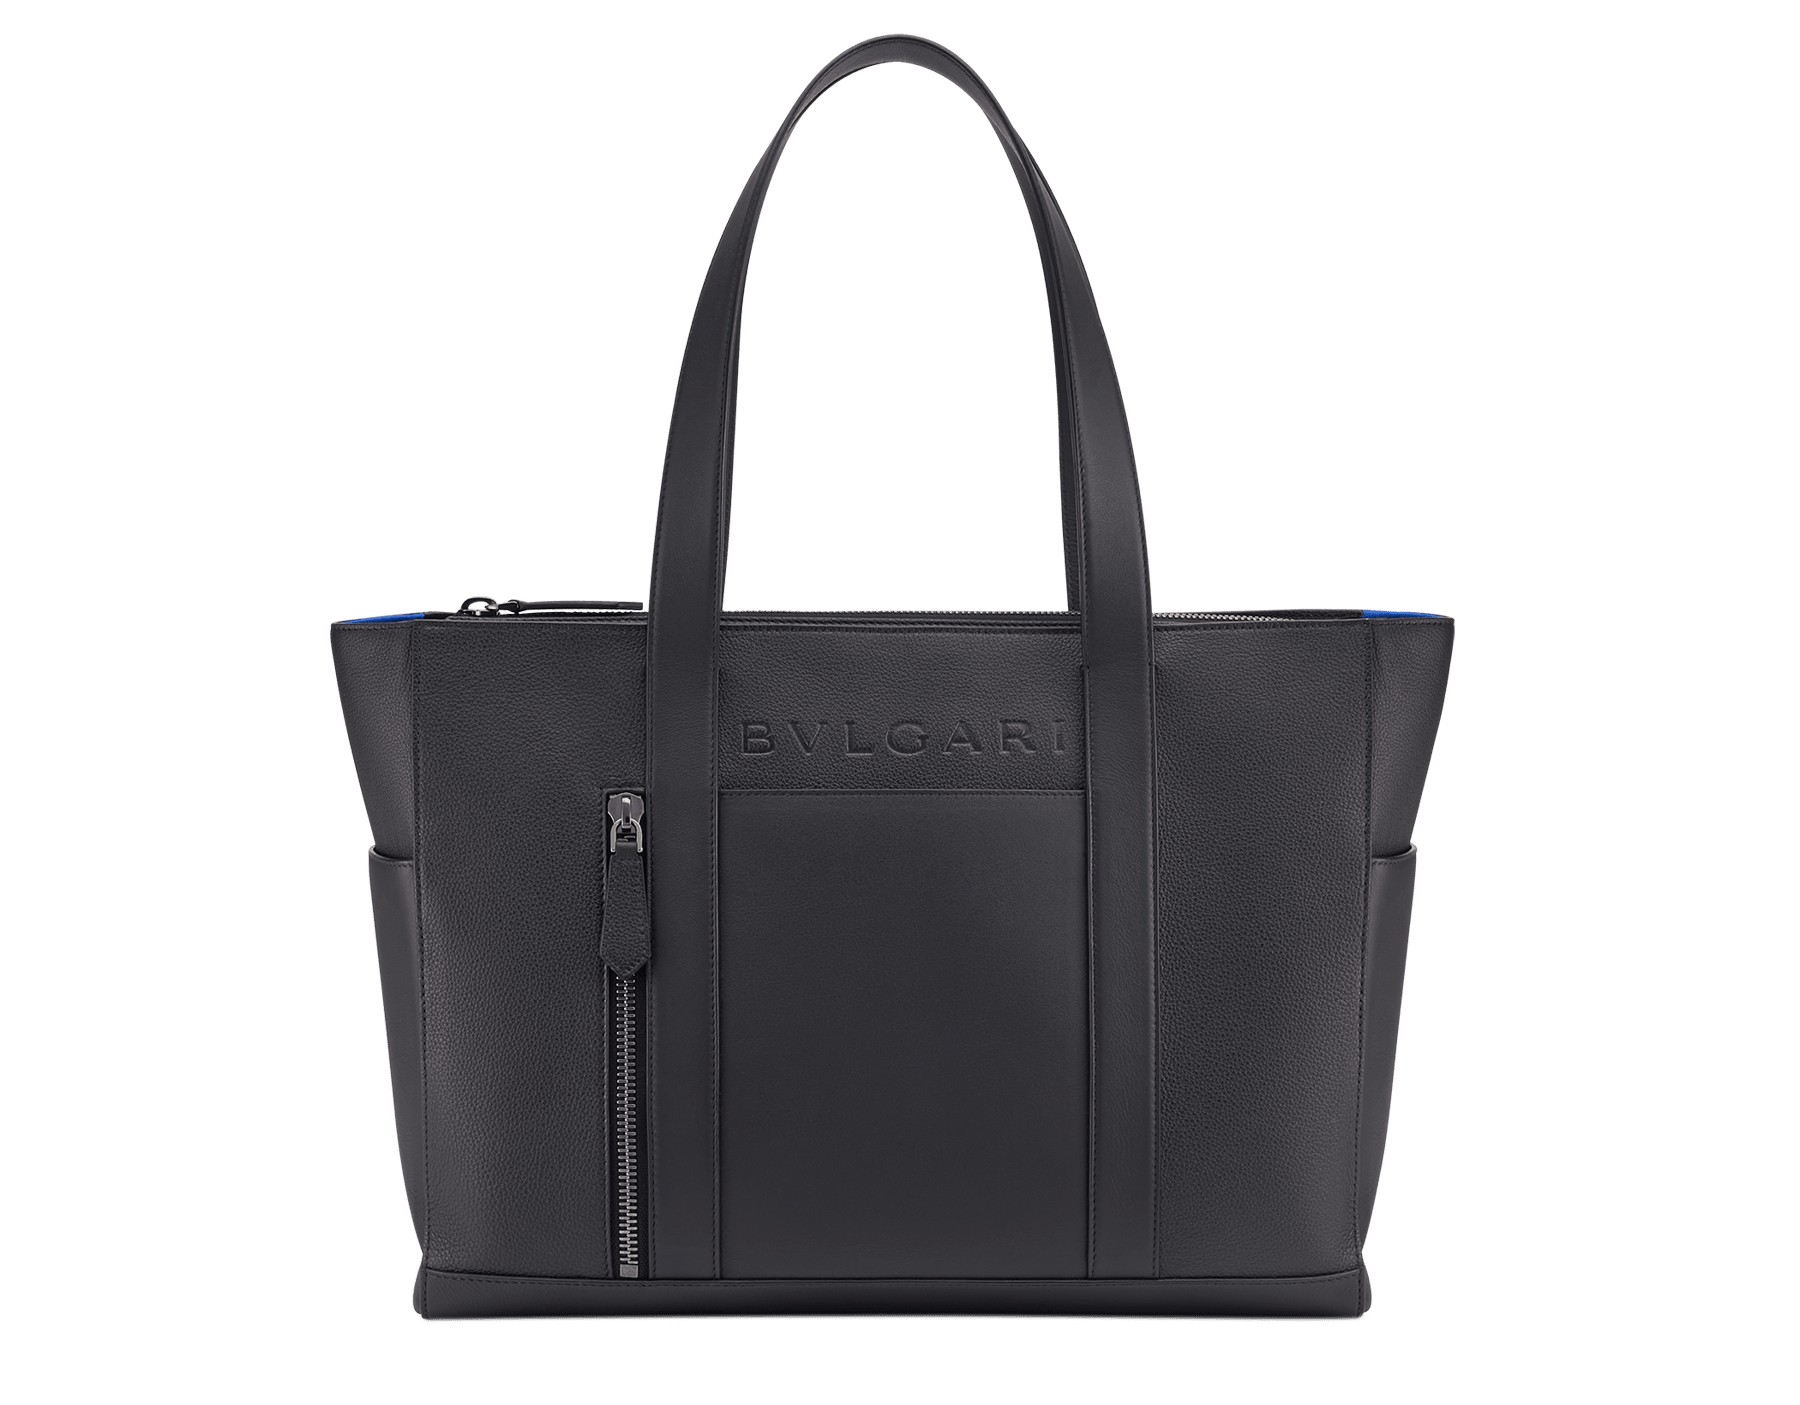 BULGARI Man large horizontal tote bag in ivy onyx grey smooth and grainy metal-free calf leather with Olympian sapphire blue regenerated nylon (ECONYL®) lining. Dark ruthenium-plated brass hardware, hot stamped BULGARI logo and zipped closure. BMA-1211-CL image 1